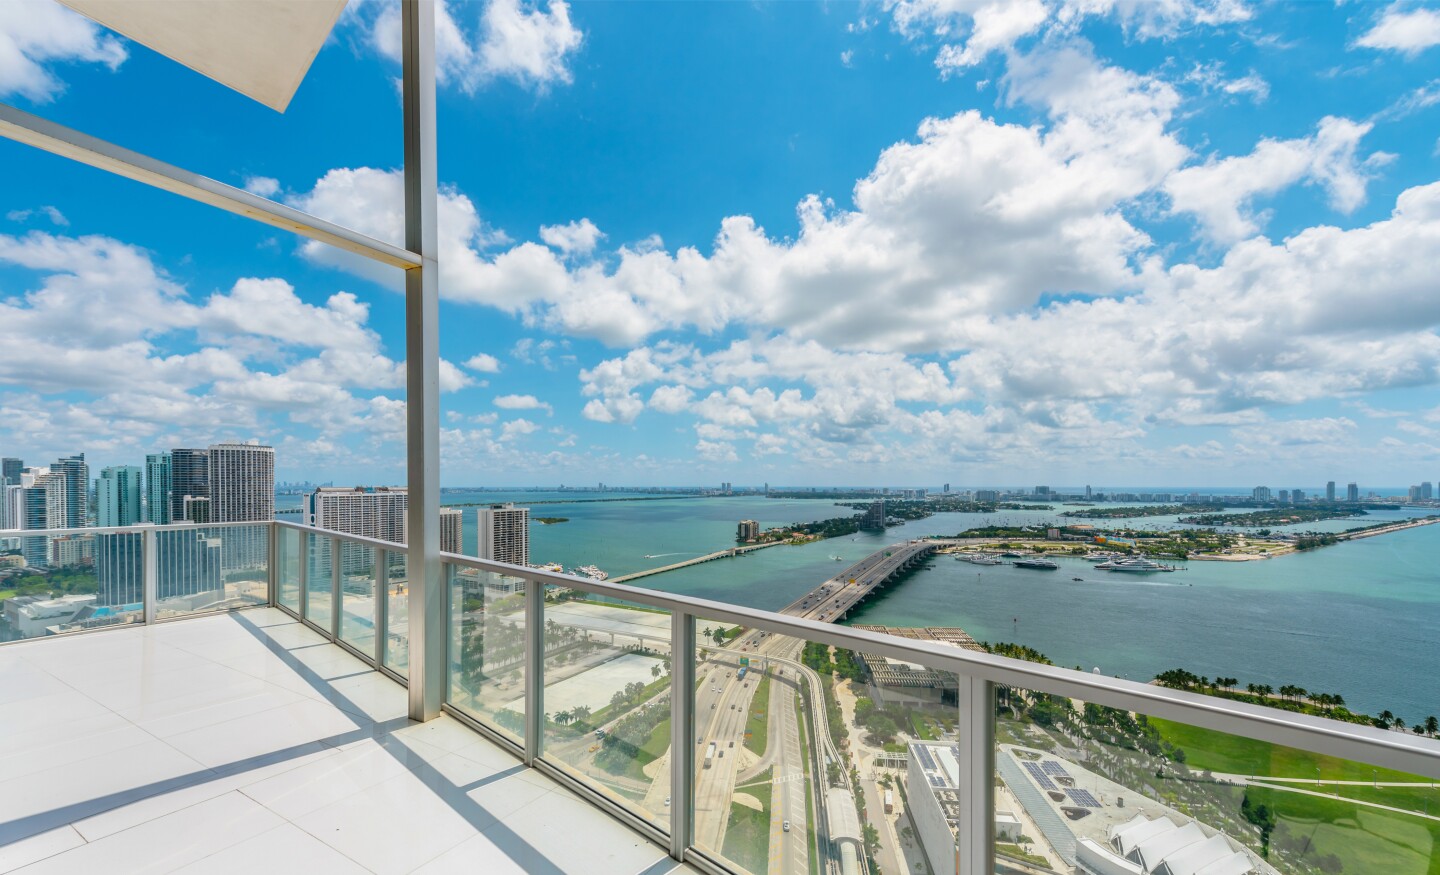 The corner-unit condo takes in sweeping city and ocean views across 3,850 square feet of sleek living spaces.